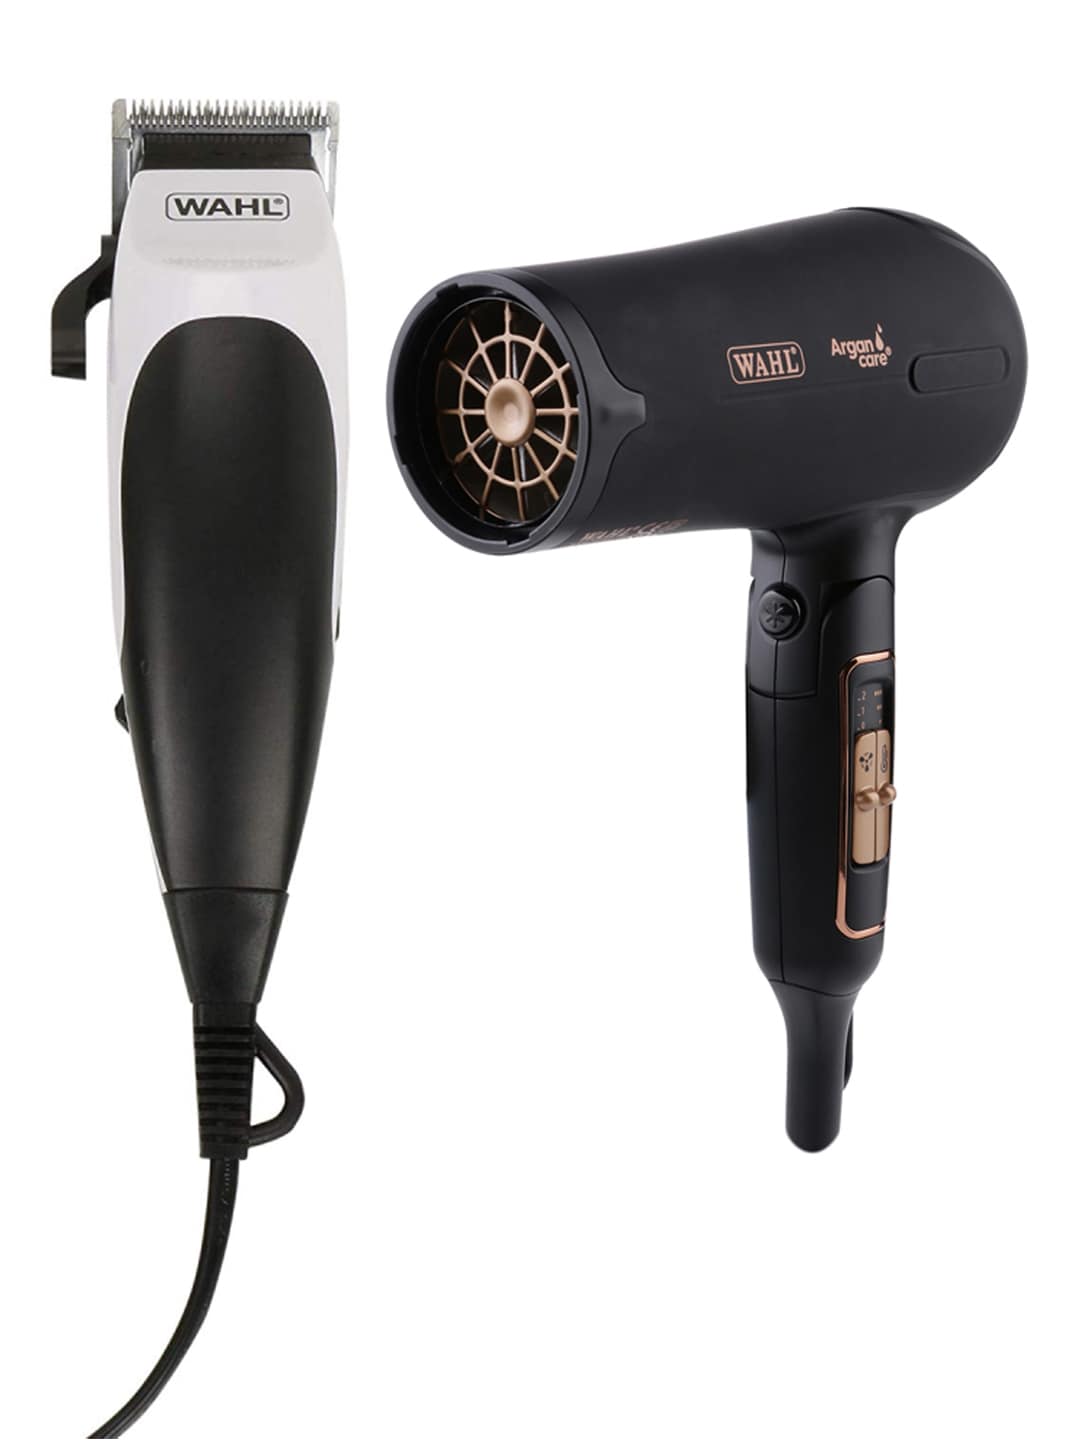 WAHL Unisex Set of Hair Clipper & Hair Dryer Price in India